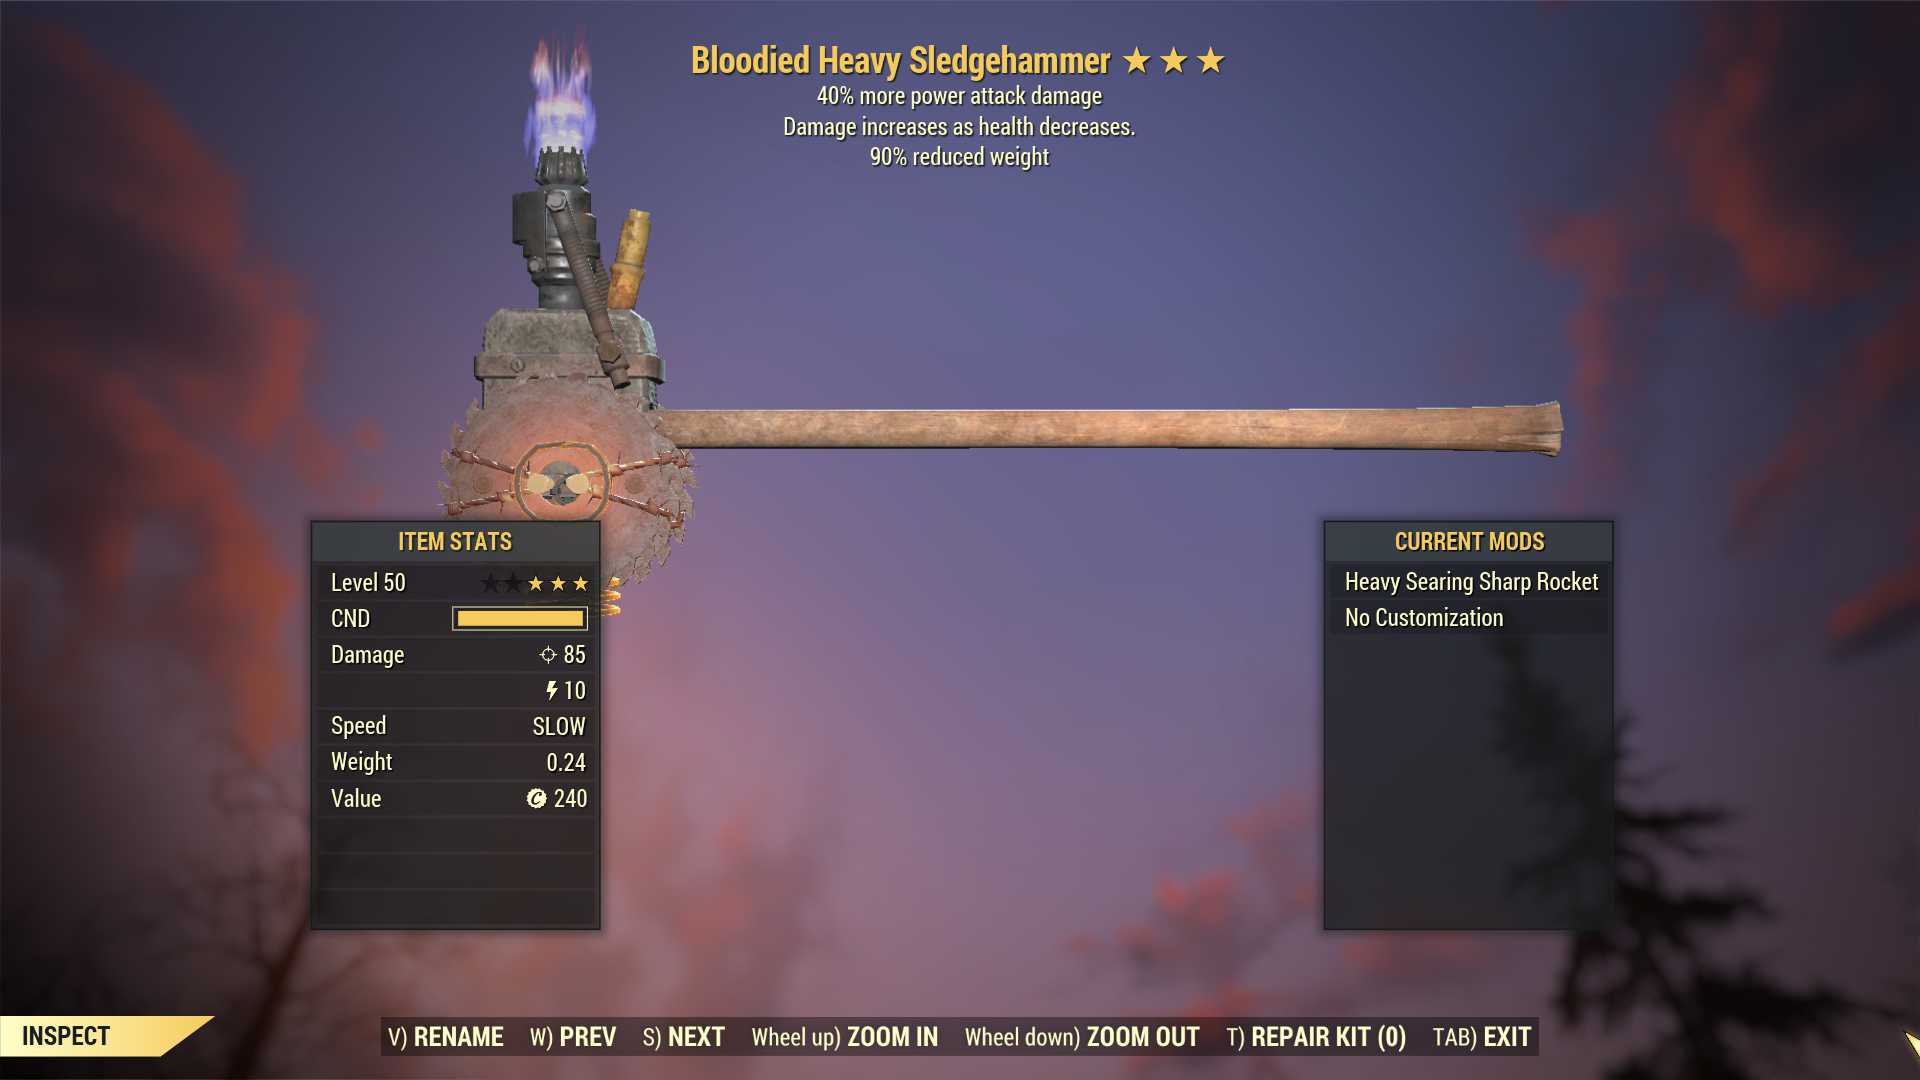 Bloodied Sledgehammer (+40% damage PA, 90% reduced weight)